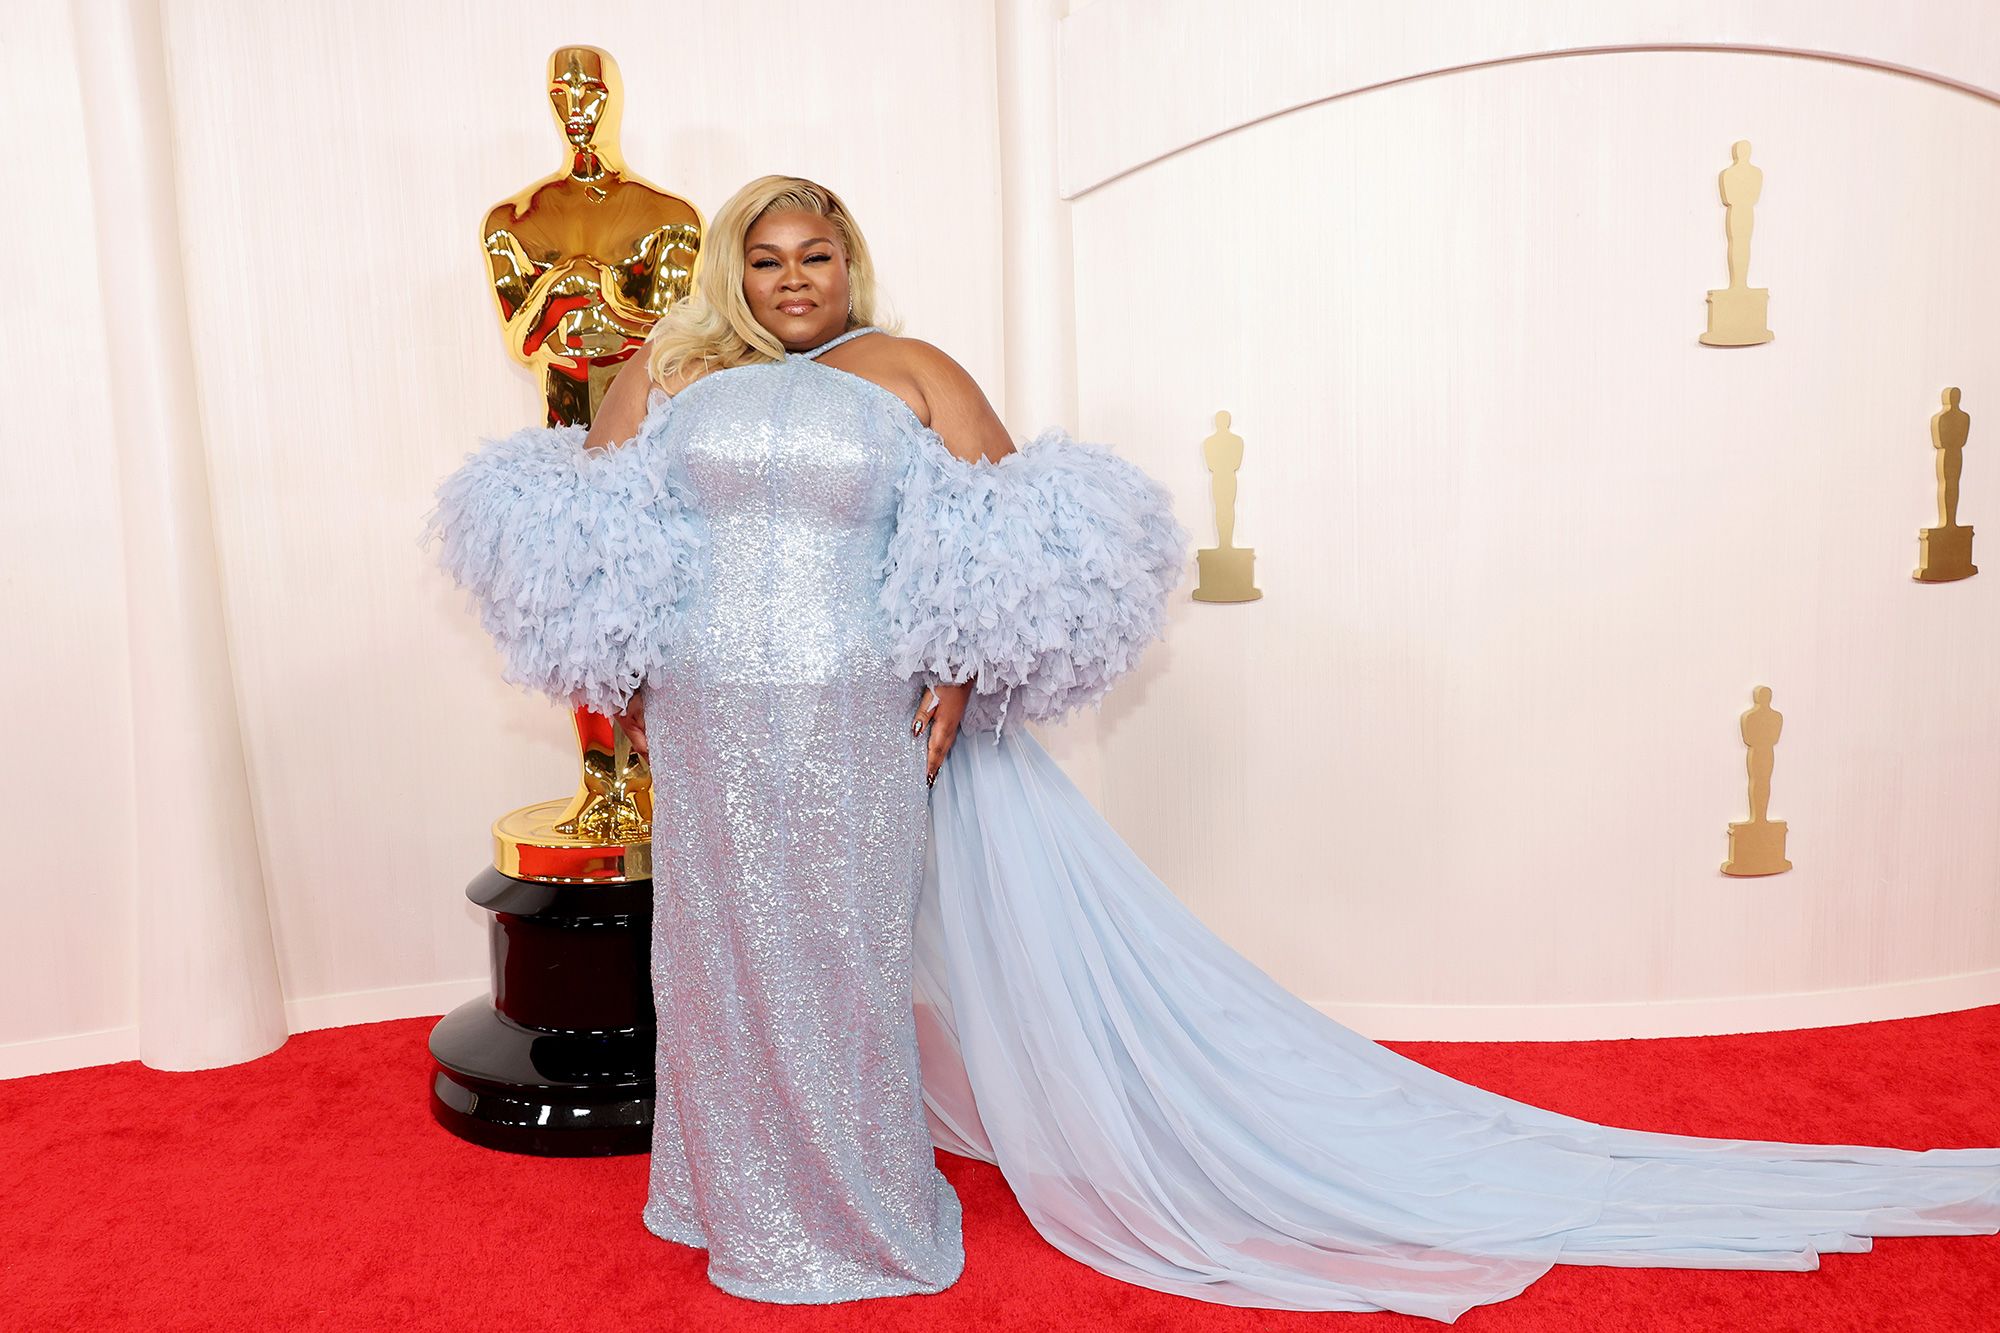 Da'Vine Joy Randolph, who won the Oscar for Best Supporting Actress, wore a custom Louis Vuitton gown with hand-embroidered tulle and oversized fringe sleeves.